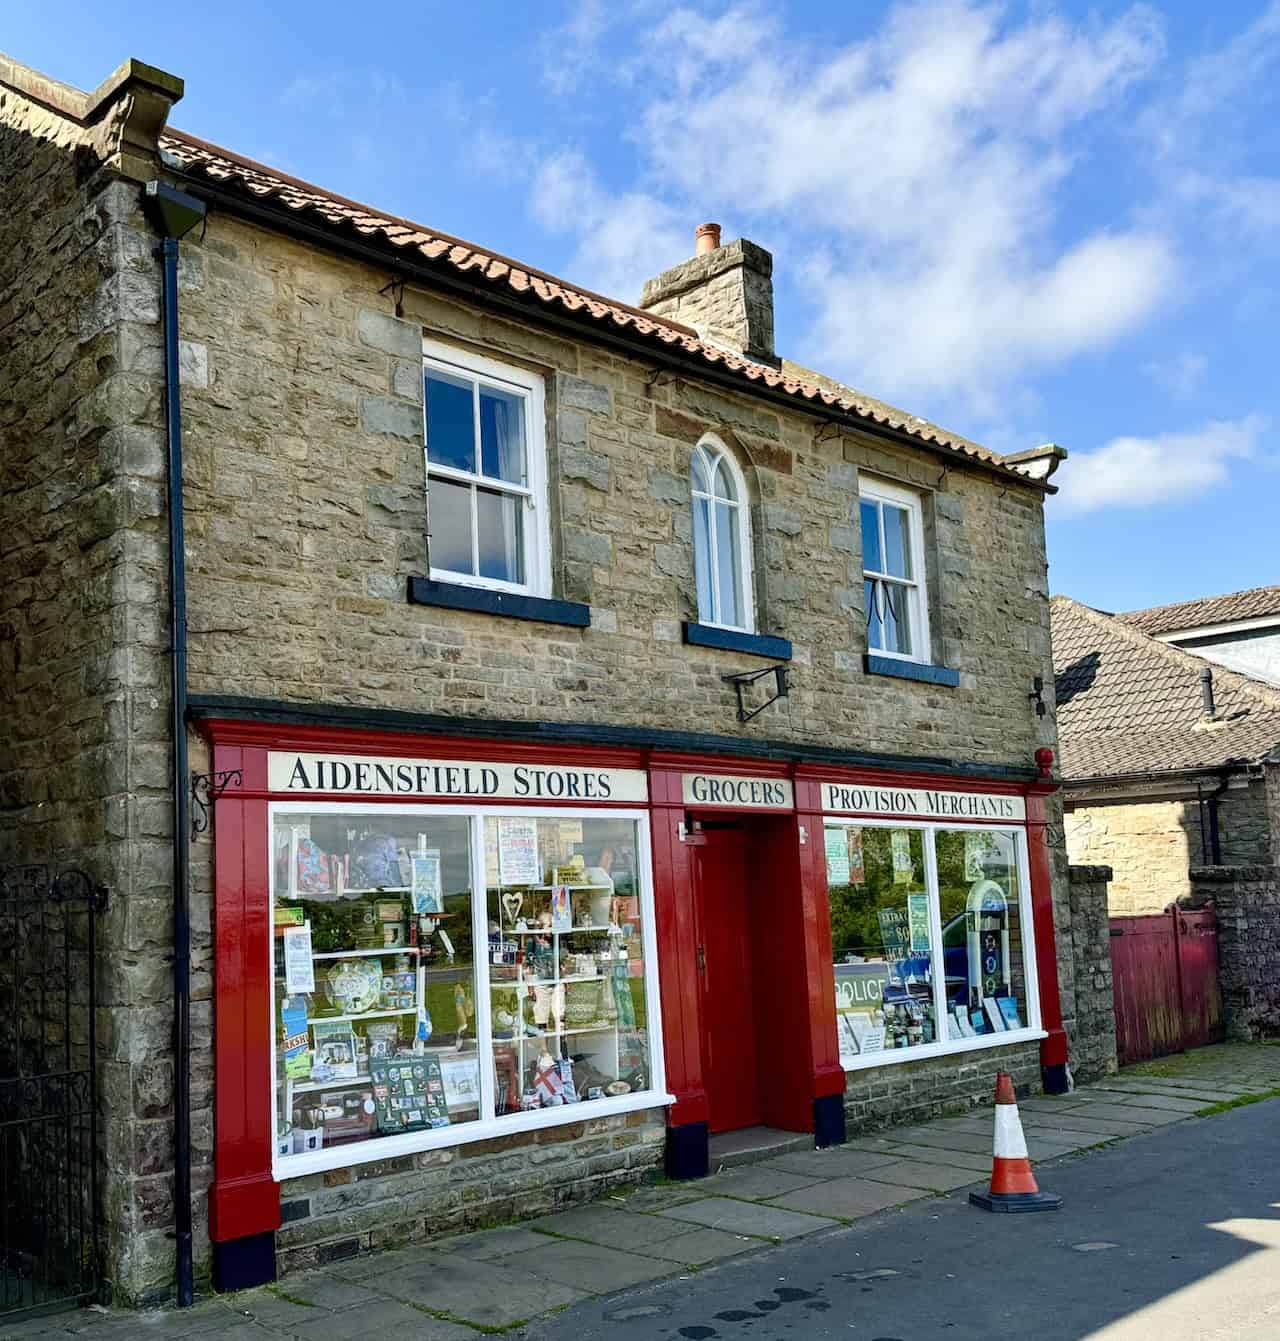 Aidensfield Stores with its distinctive red and cream exterior. Known for its role in Heartbeat, it served as the village's grocery and provision merchants, displaying memorabilia in its large windows.
